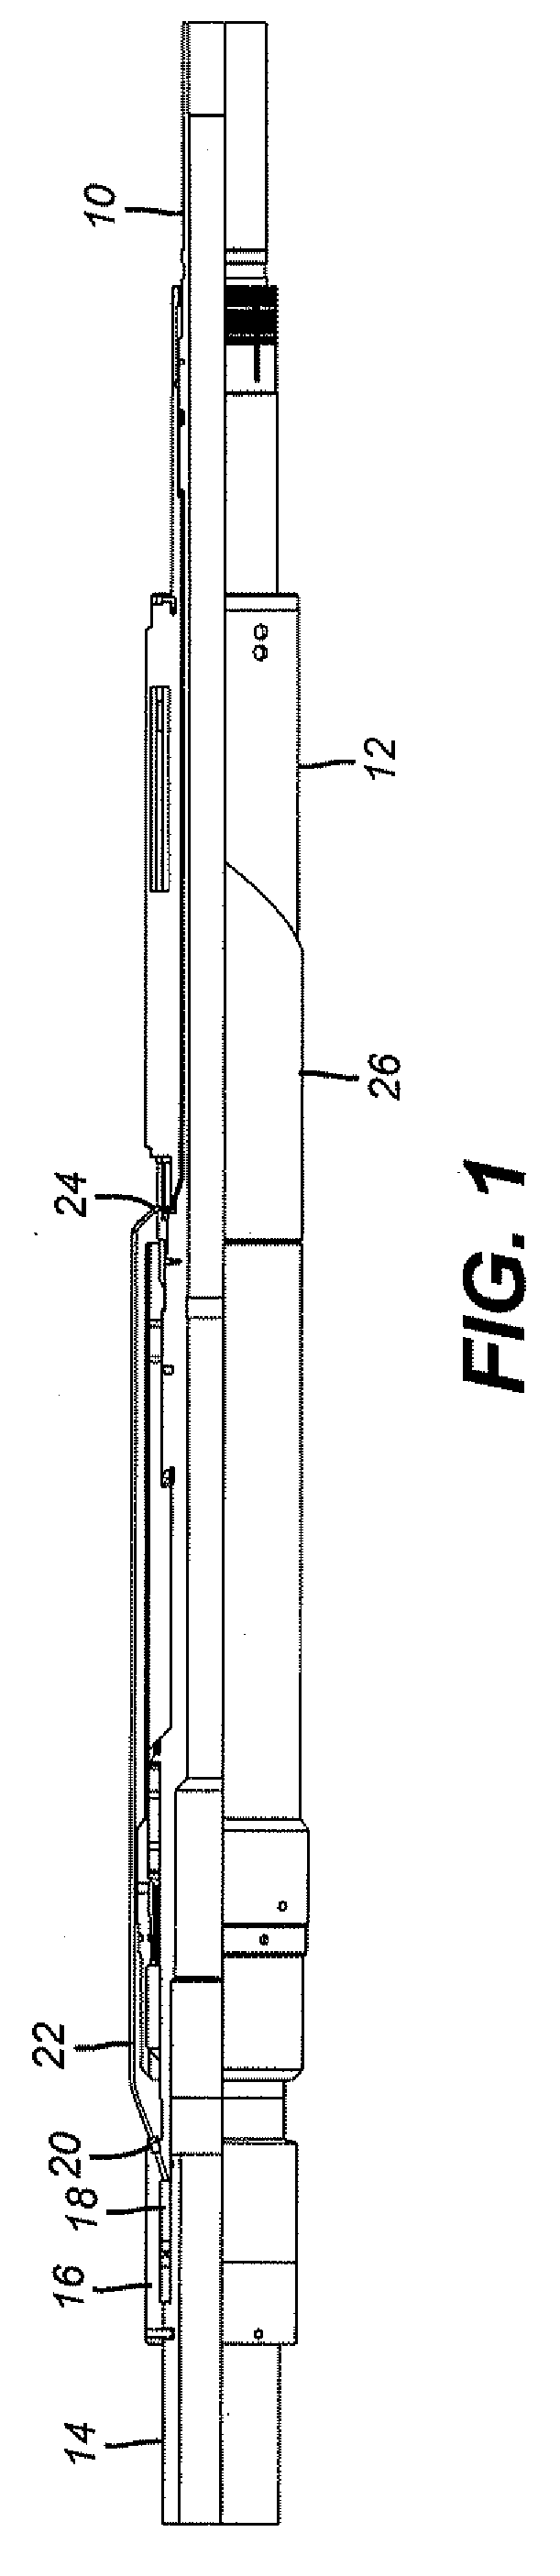 String Mounted Hydraulic Pressure Generating Device for Downhole Tool Actuation